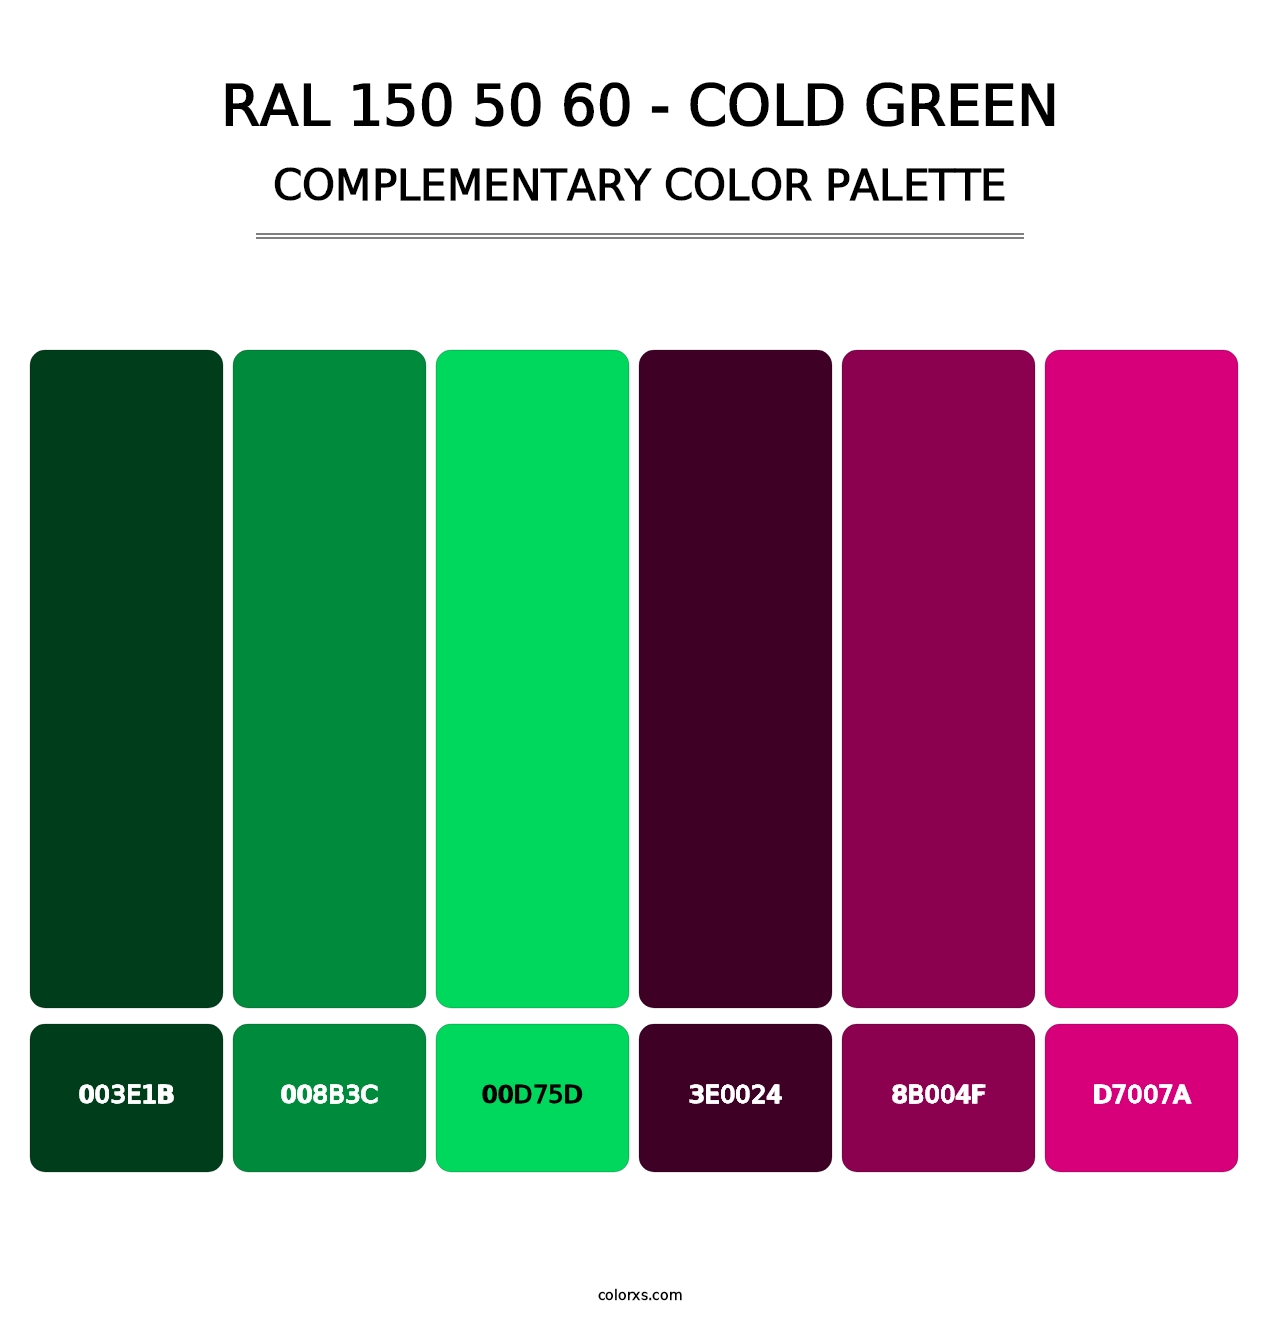 RAL 150 50 60 - Cold Green - Complementary Color Palette